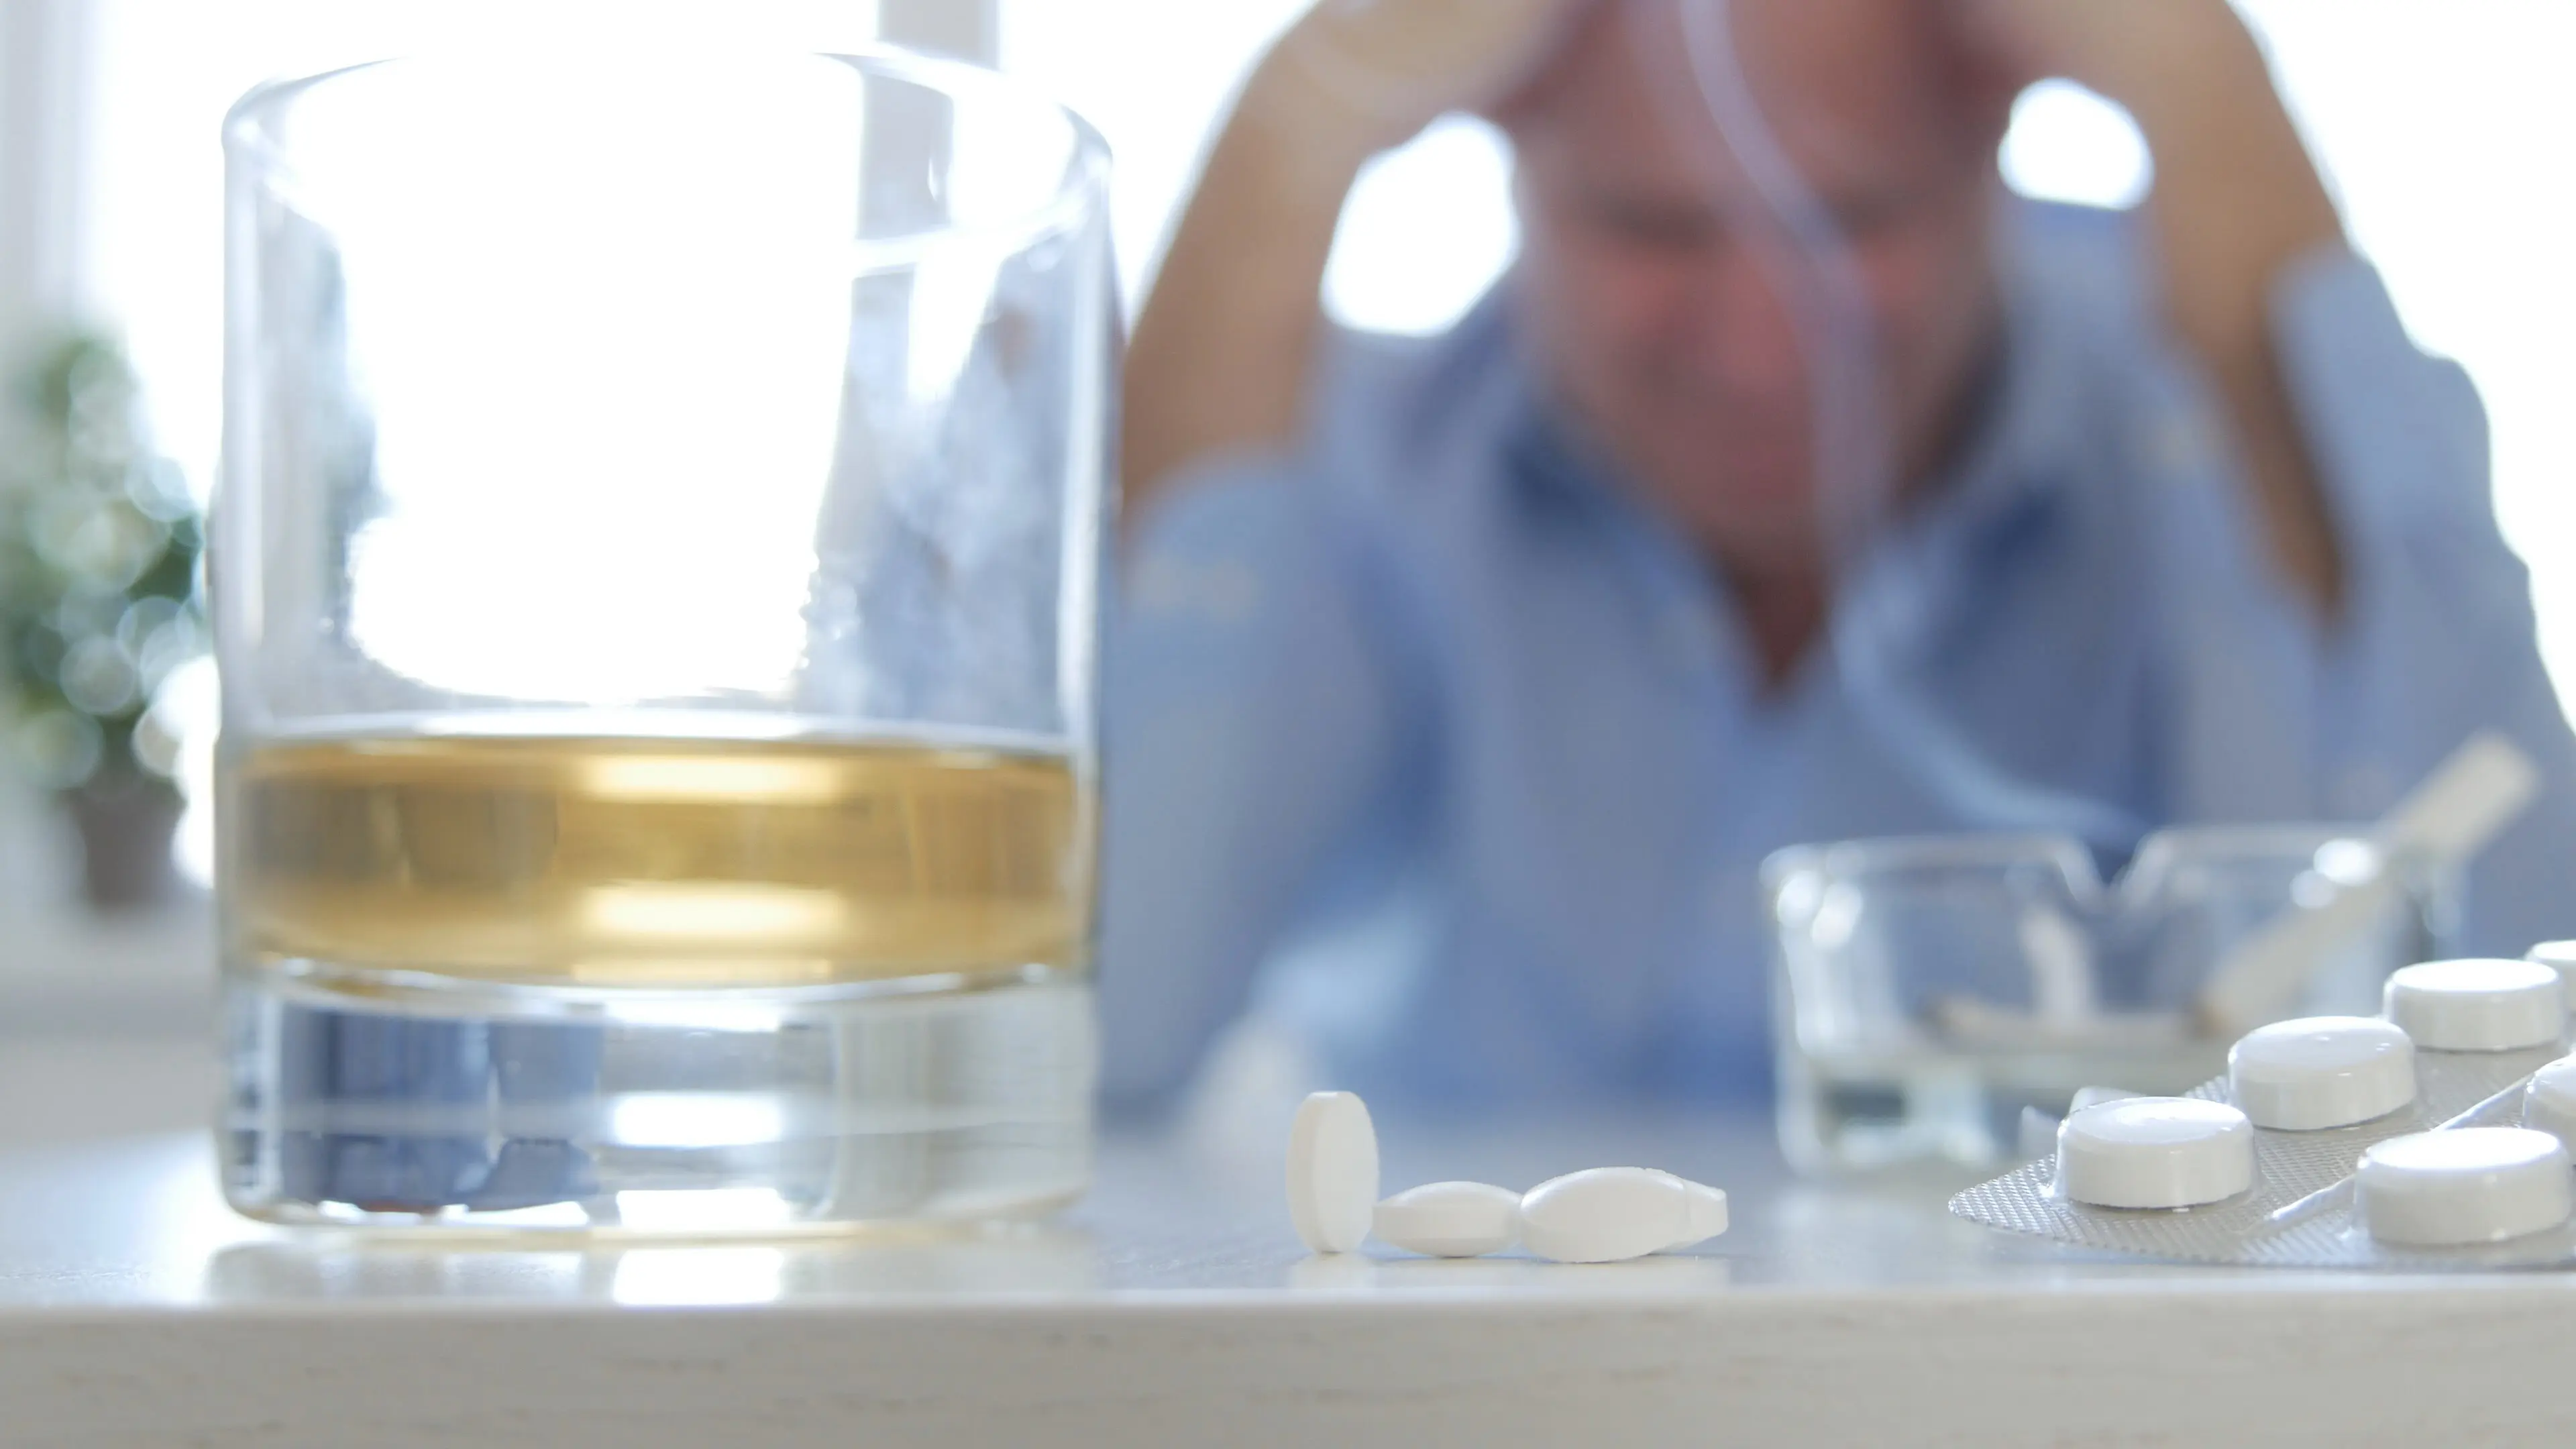 Dangers Of Mixing Xanax And Alcohol